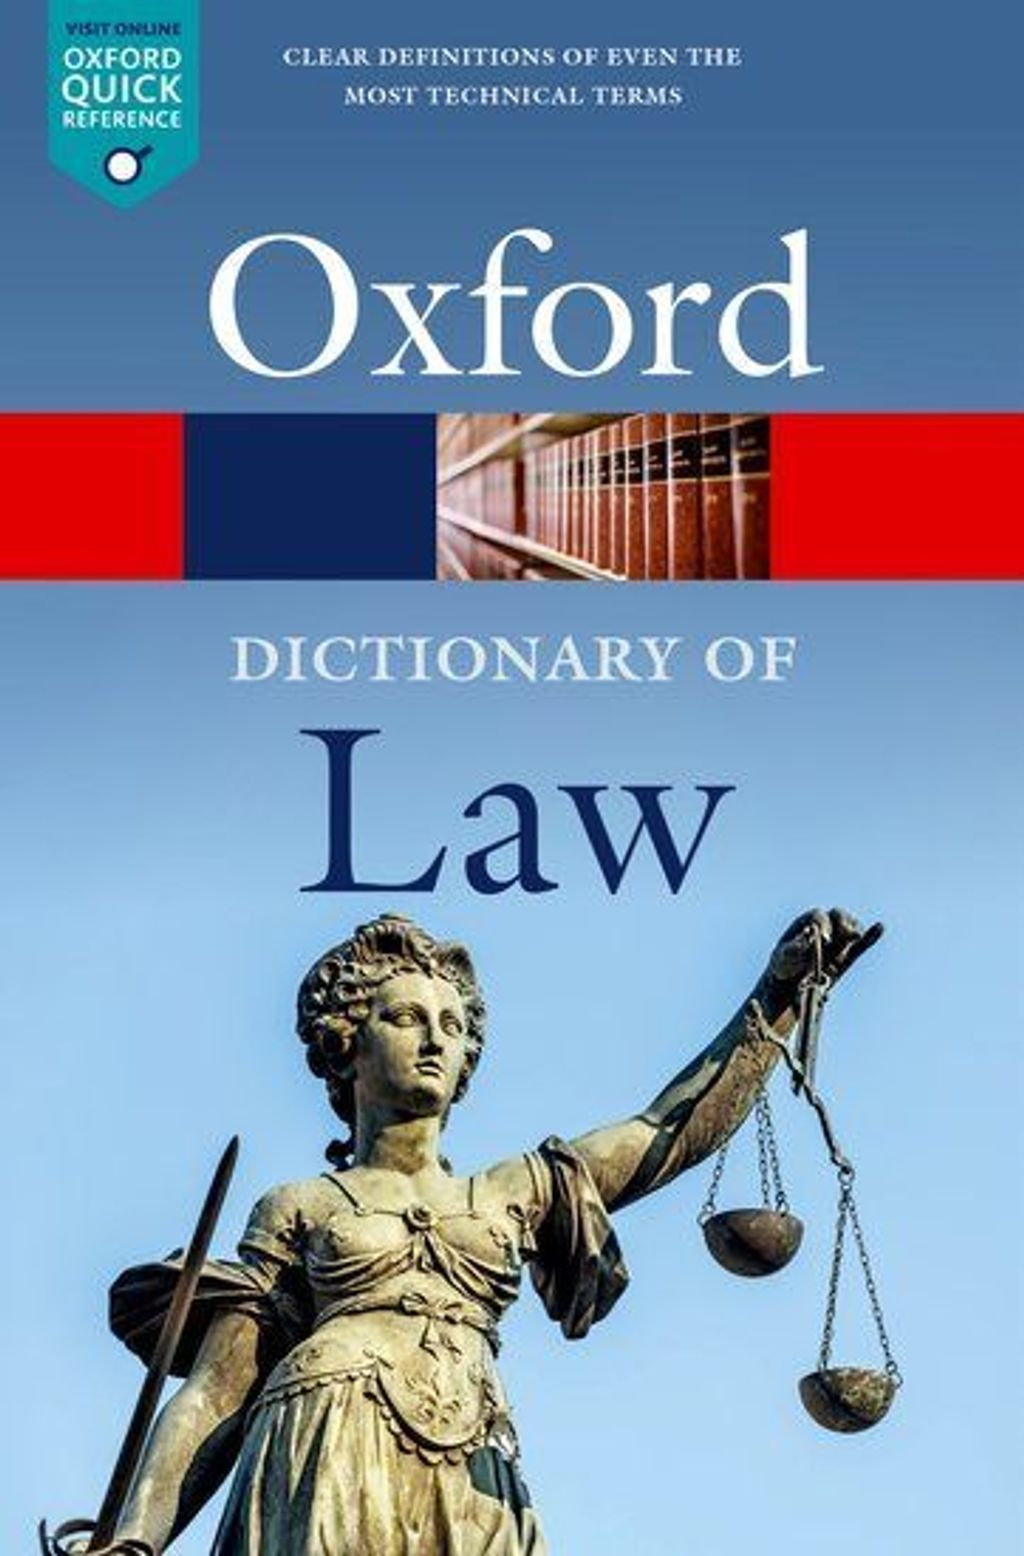 Oxford Dictionary of Law 10th Edition